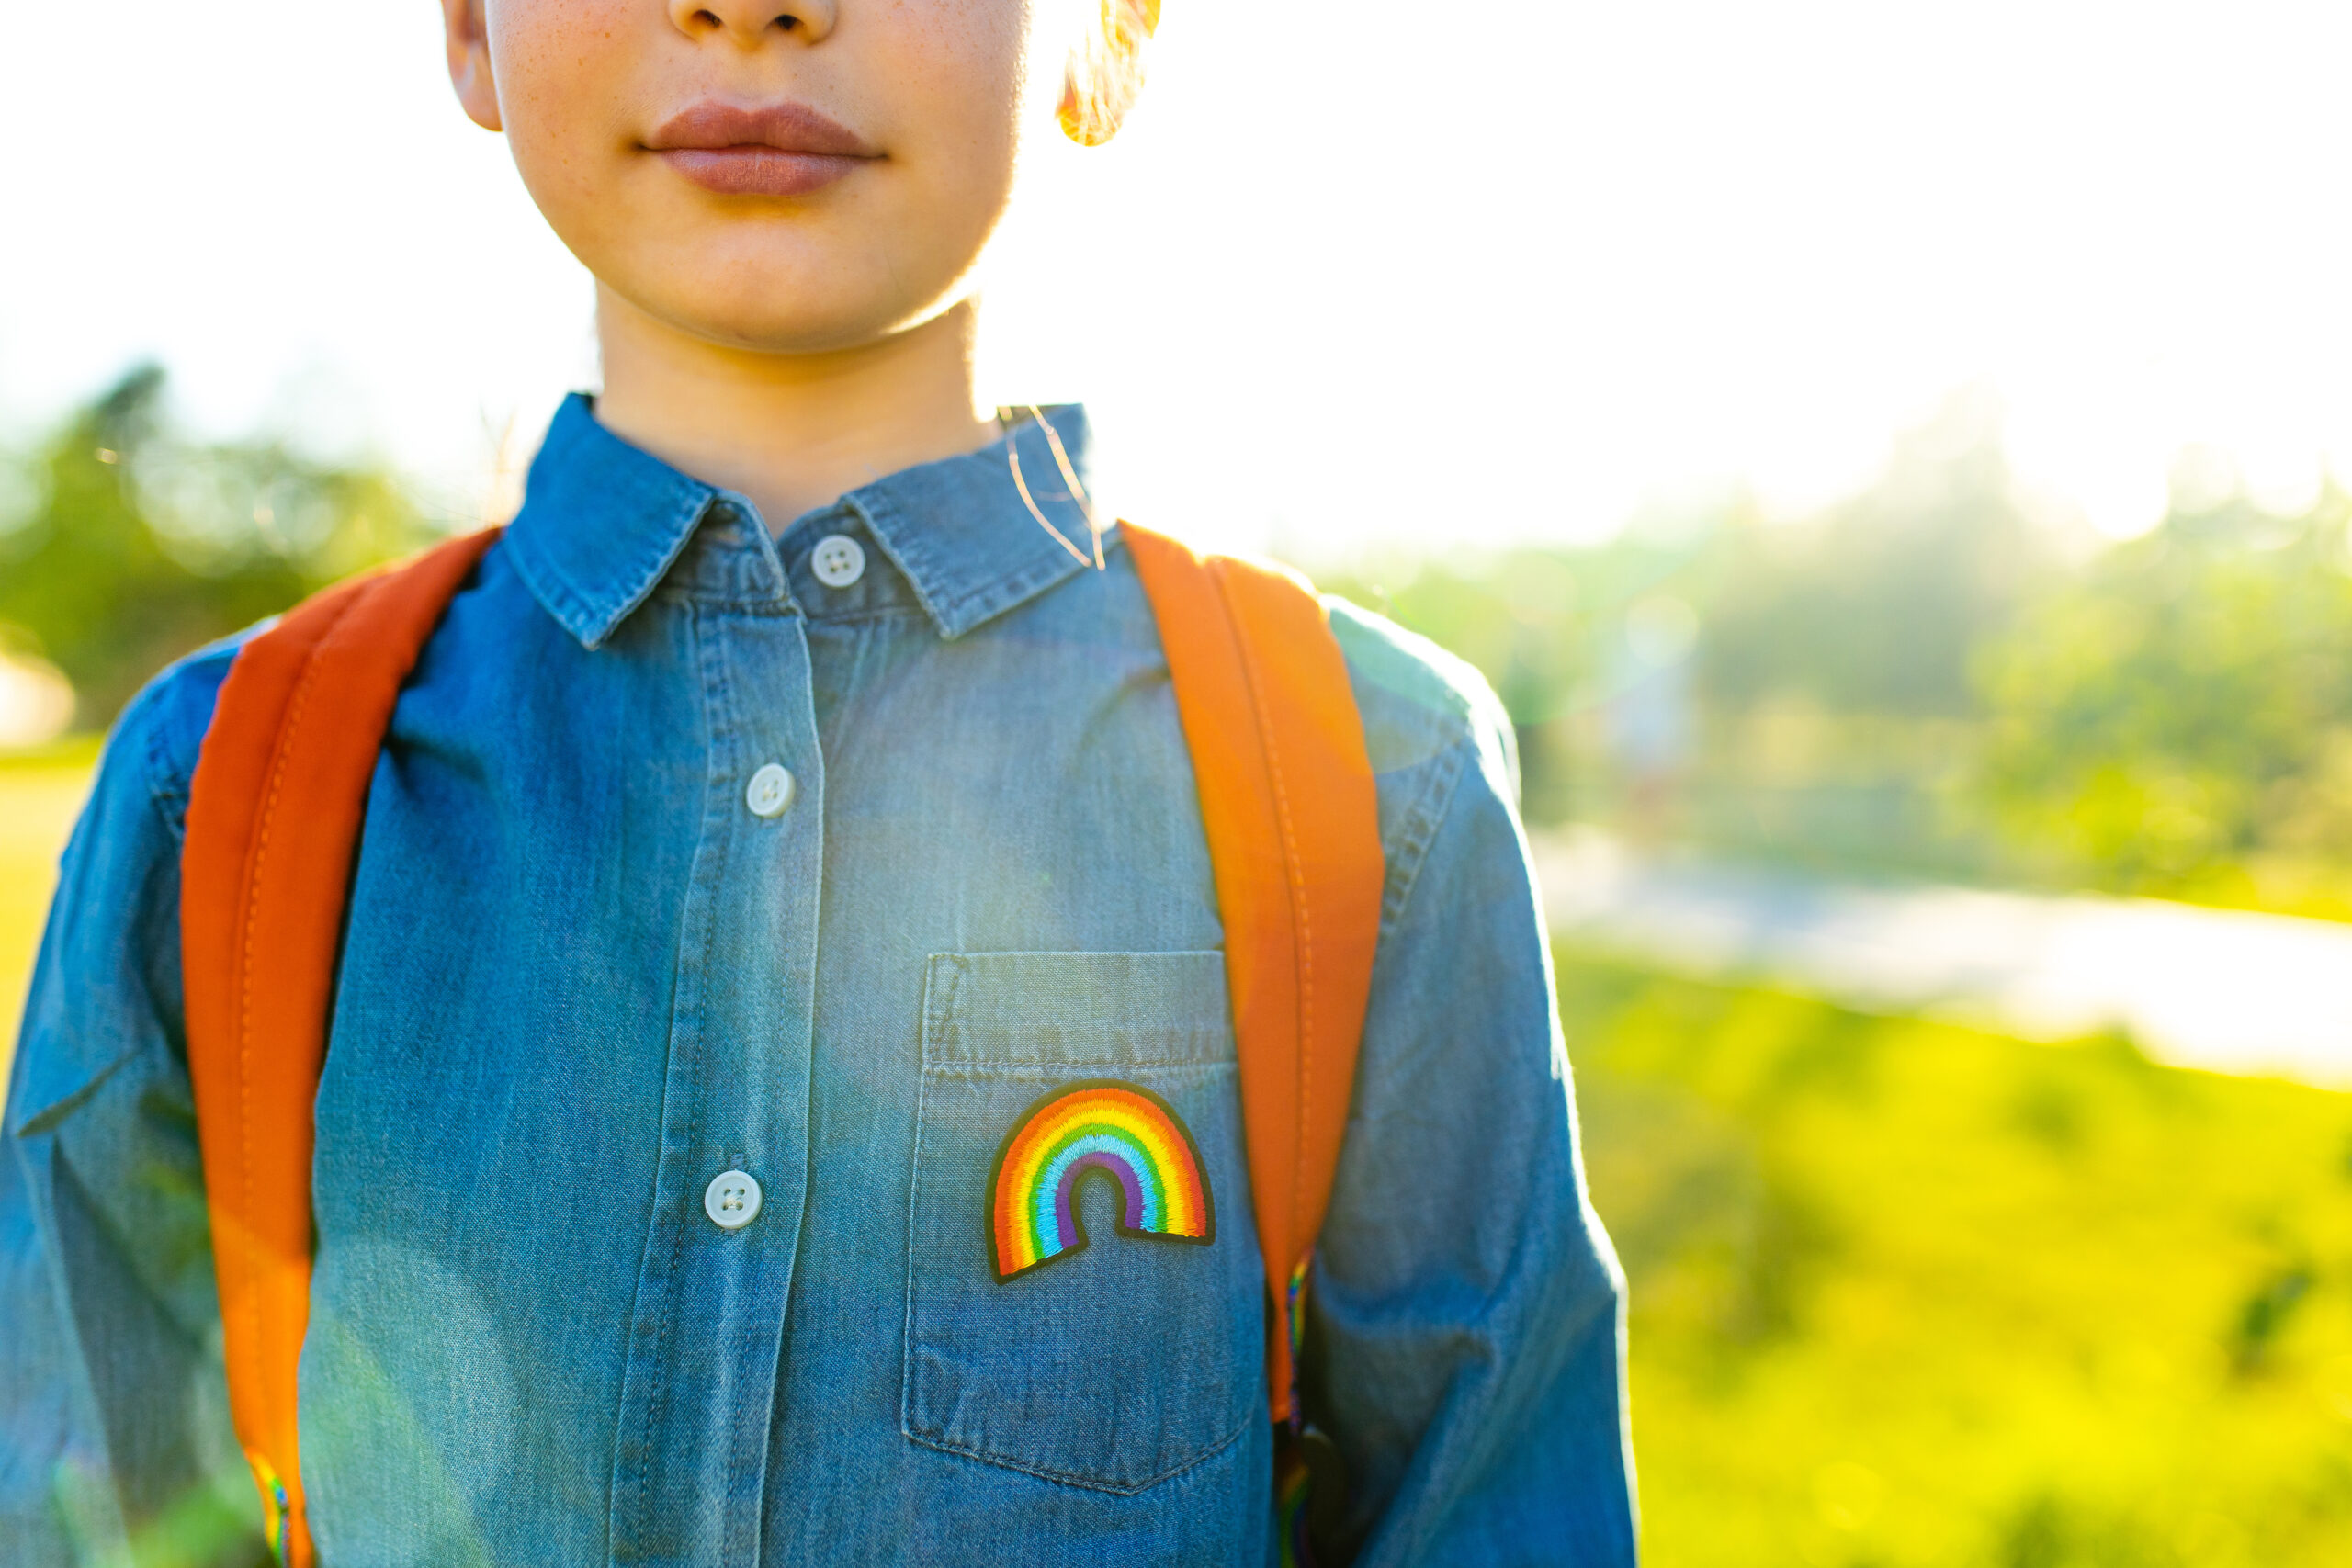 A pre-adolescent child in a denim jacket with a rainbow Pride patch, with red backpack straps visible. Just their nose and mouth are visible at the top of the photo. Texas is making life unbearable for transgender and LGBTQ+ students.